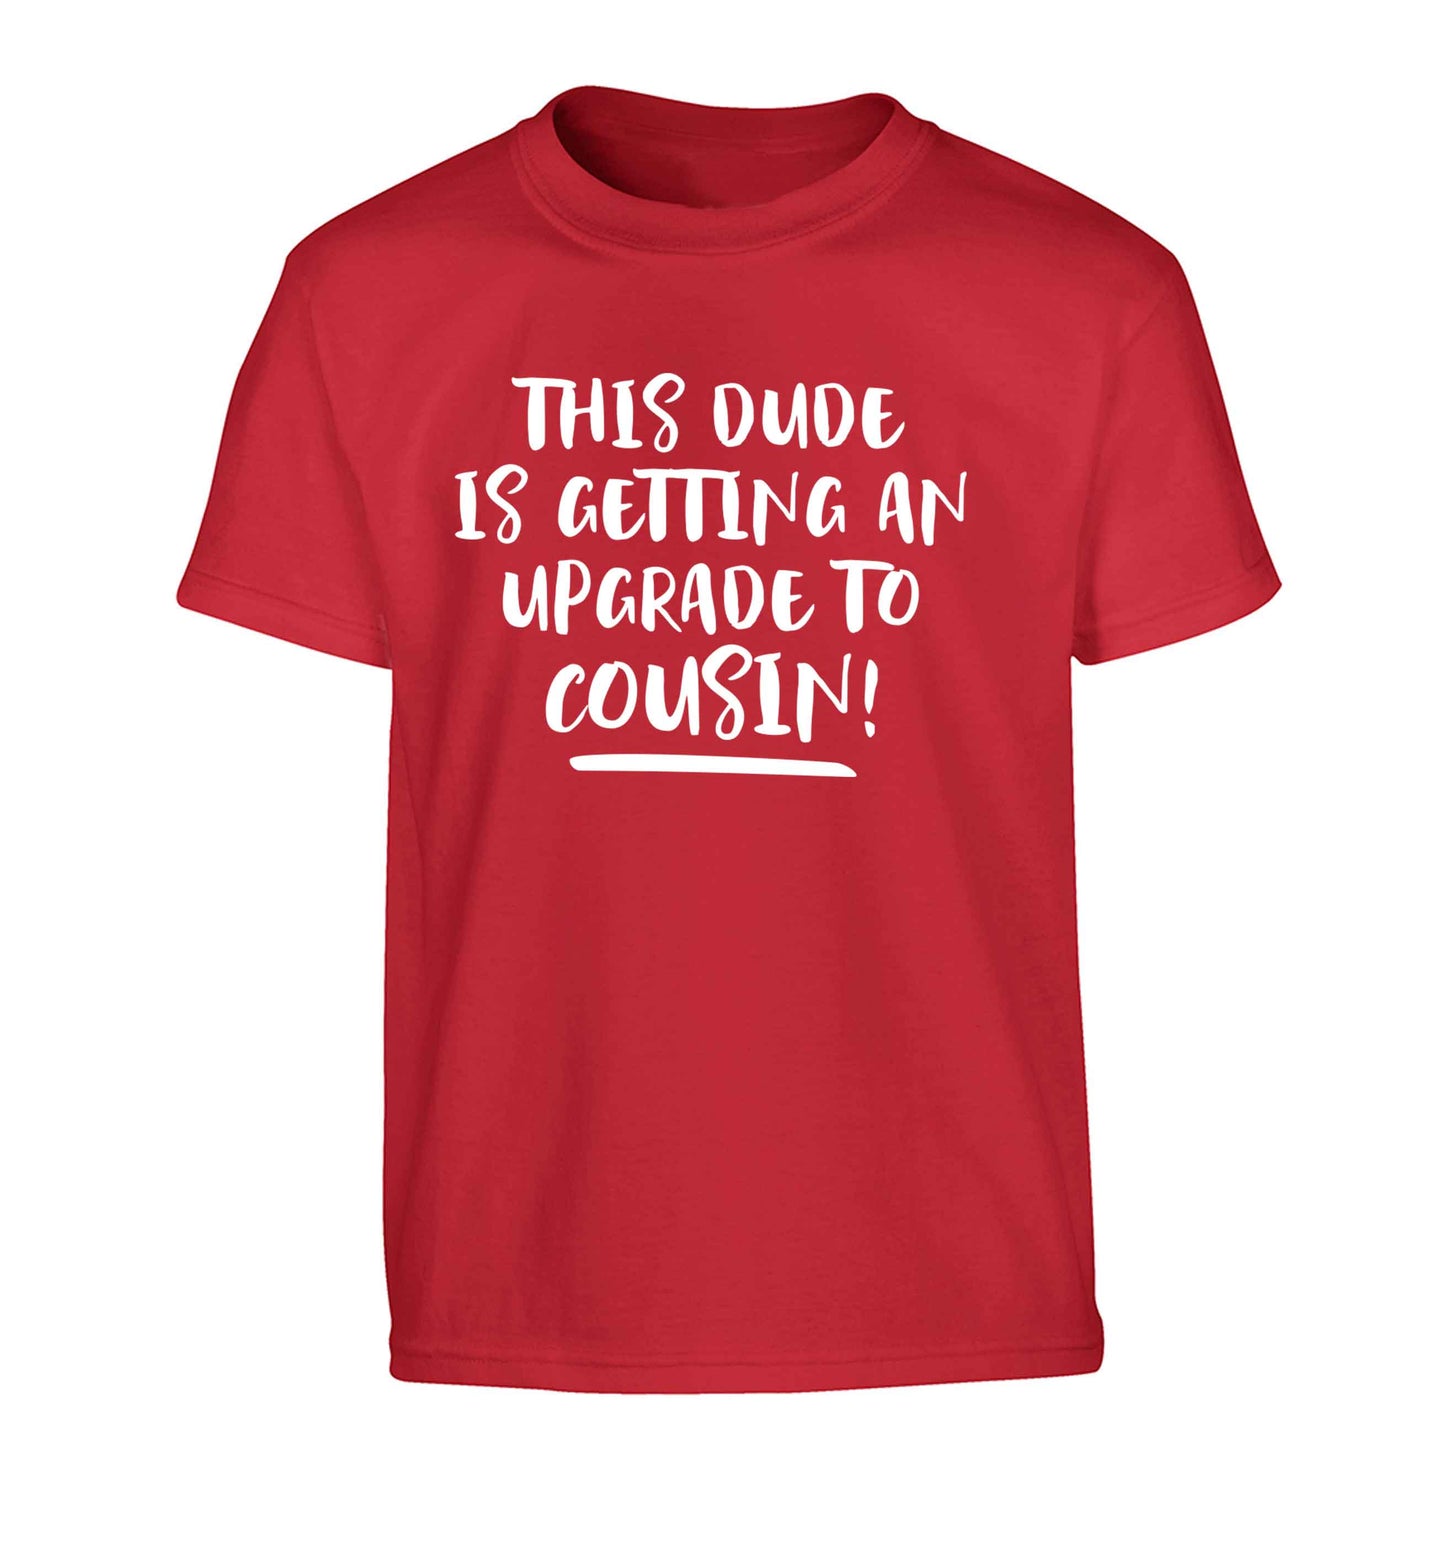 This dude is getting an upgrade to cousin! Children's red Tshirt 12-13 Years